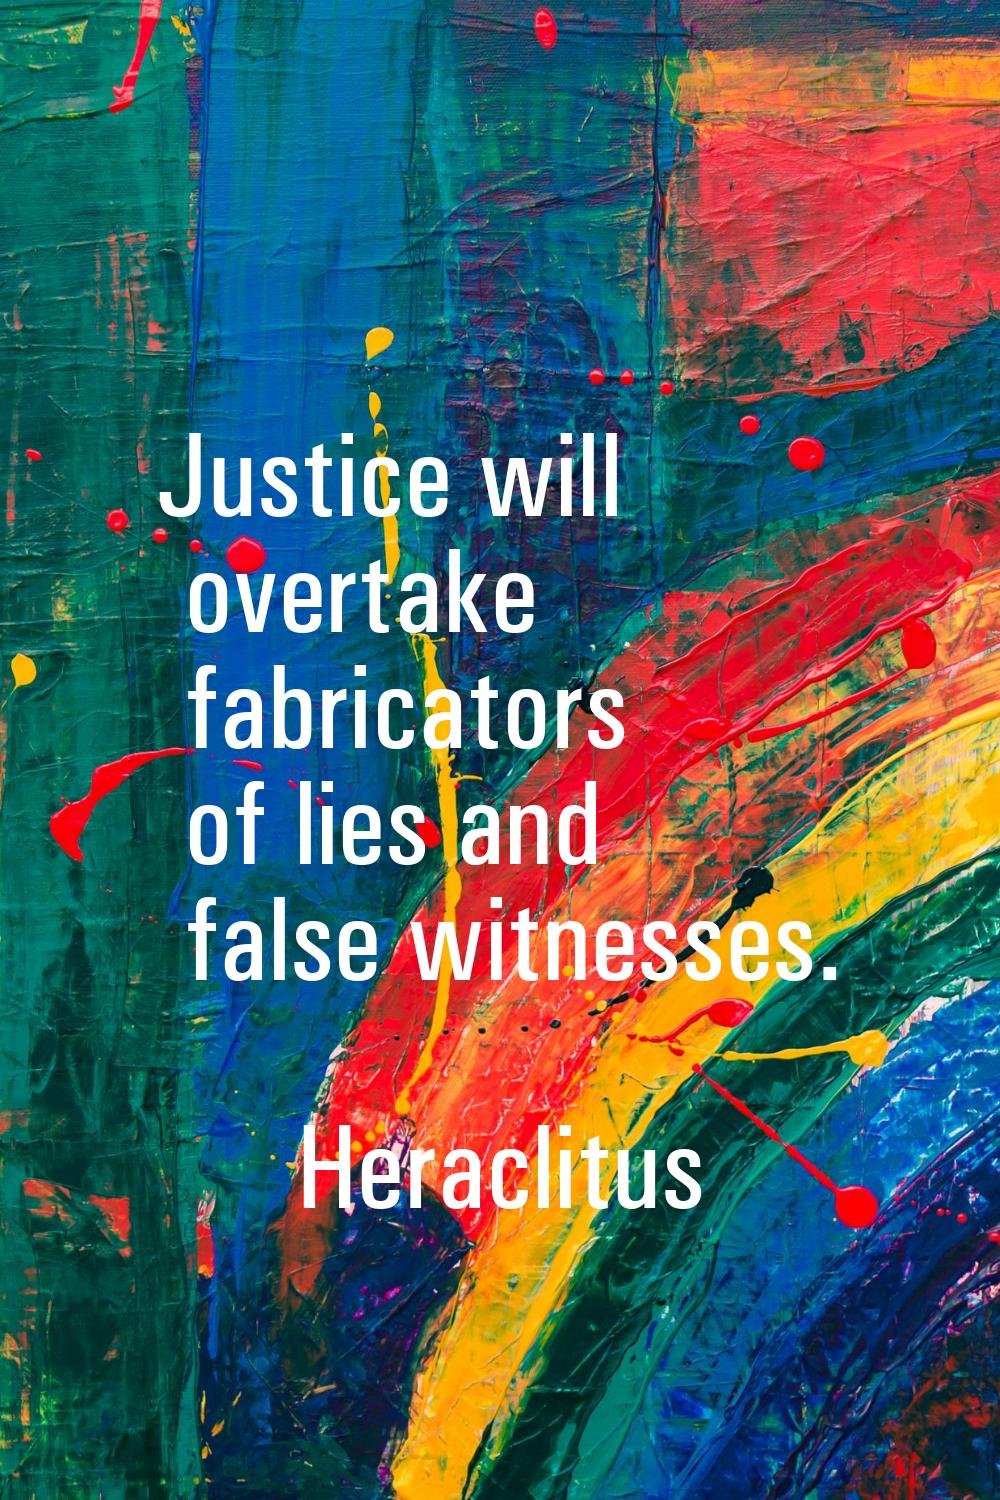 Justice will overtake fabricators of lies and false witnesses.